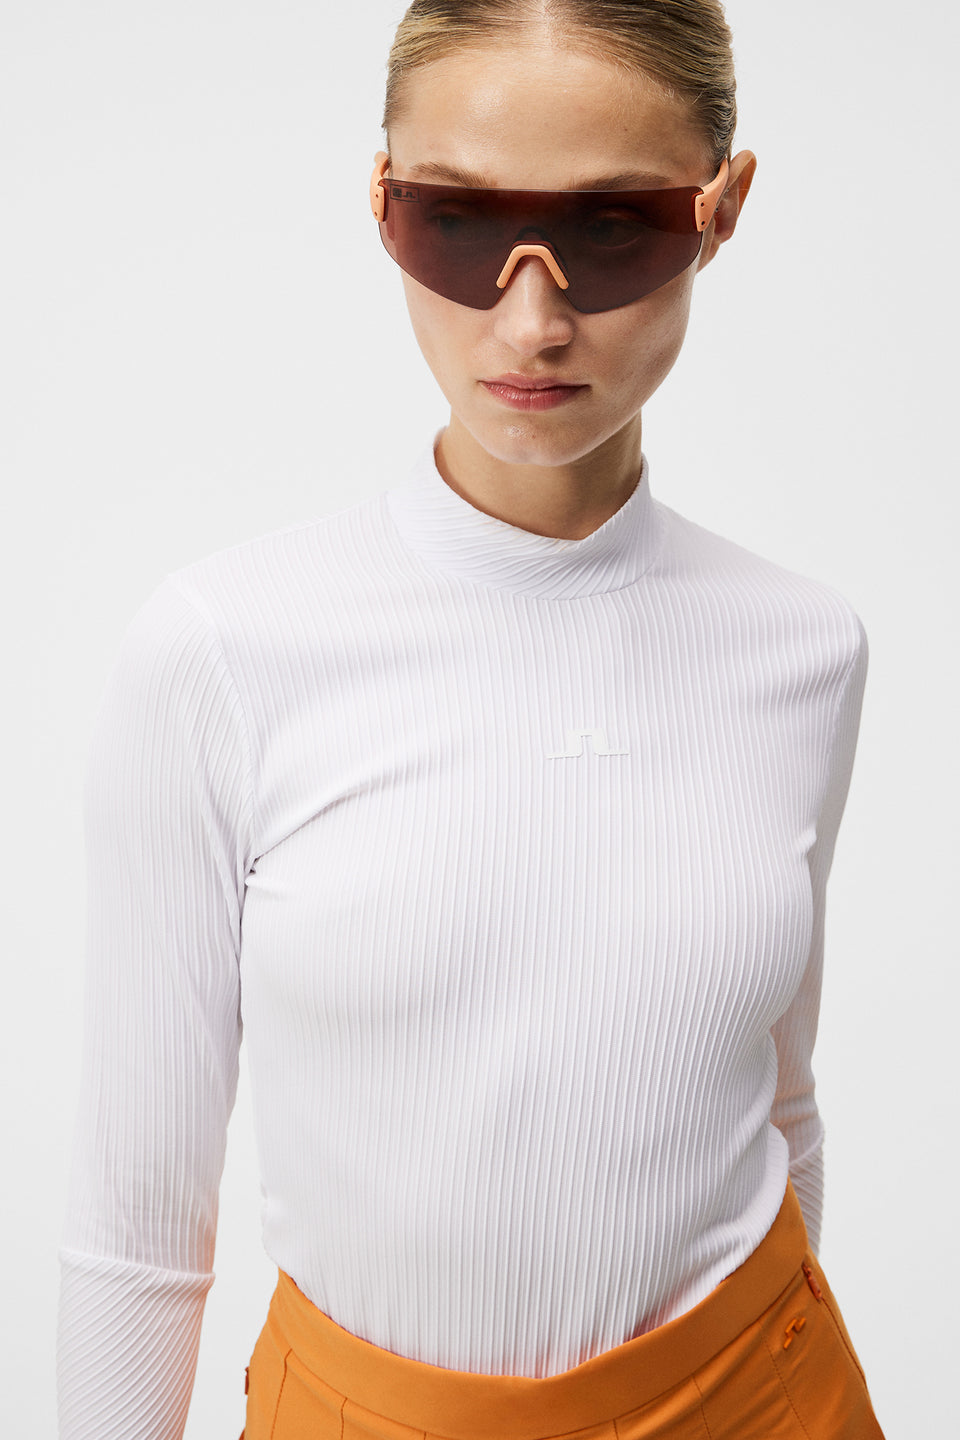 Peggy Top / White